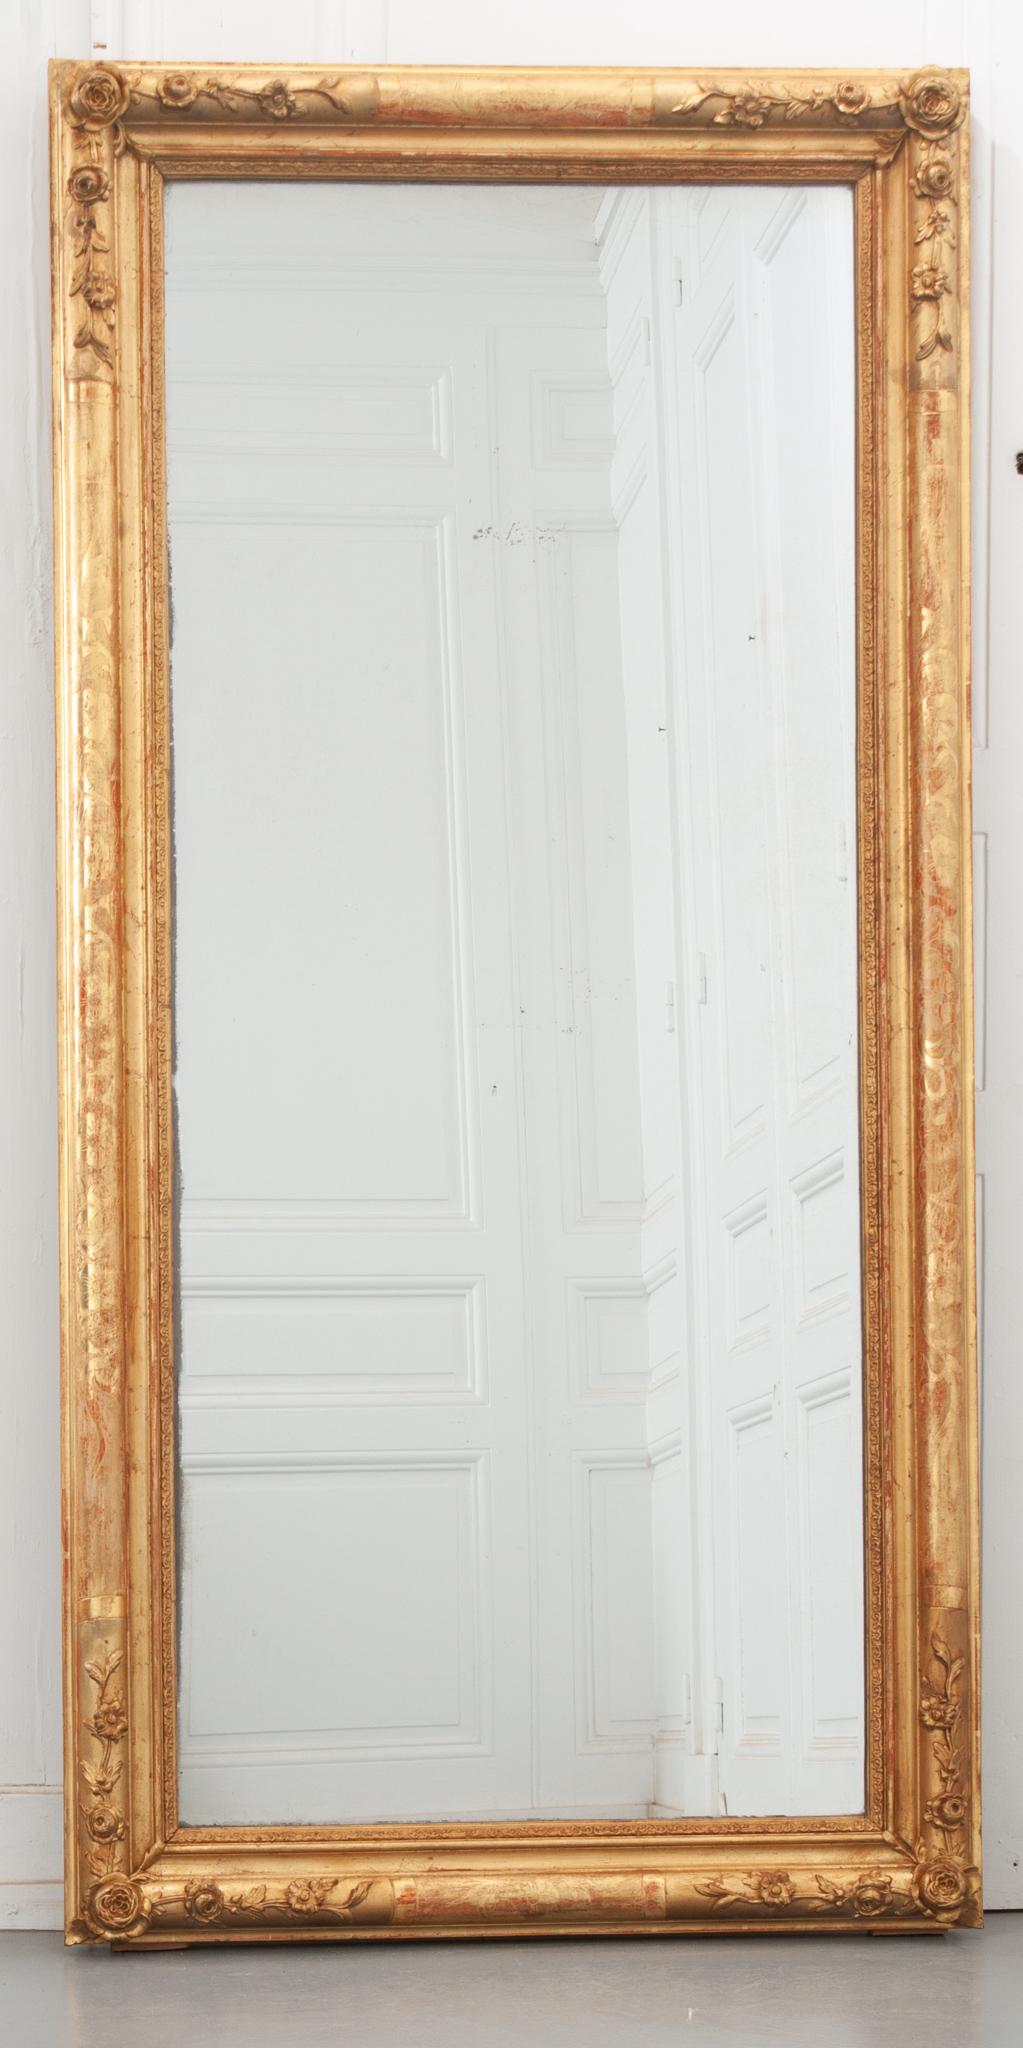 This 19th century French mirror is full of lovely floral details! The rectangular gilt frame is ornamented with floral etching on all sides and low relief carvings in each corner. Worn over the years, the red base paint peaks through the gold gilt,